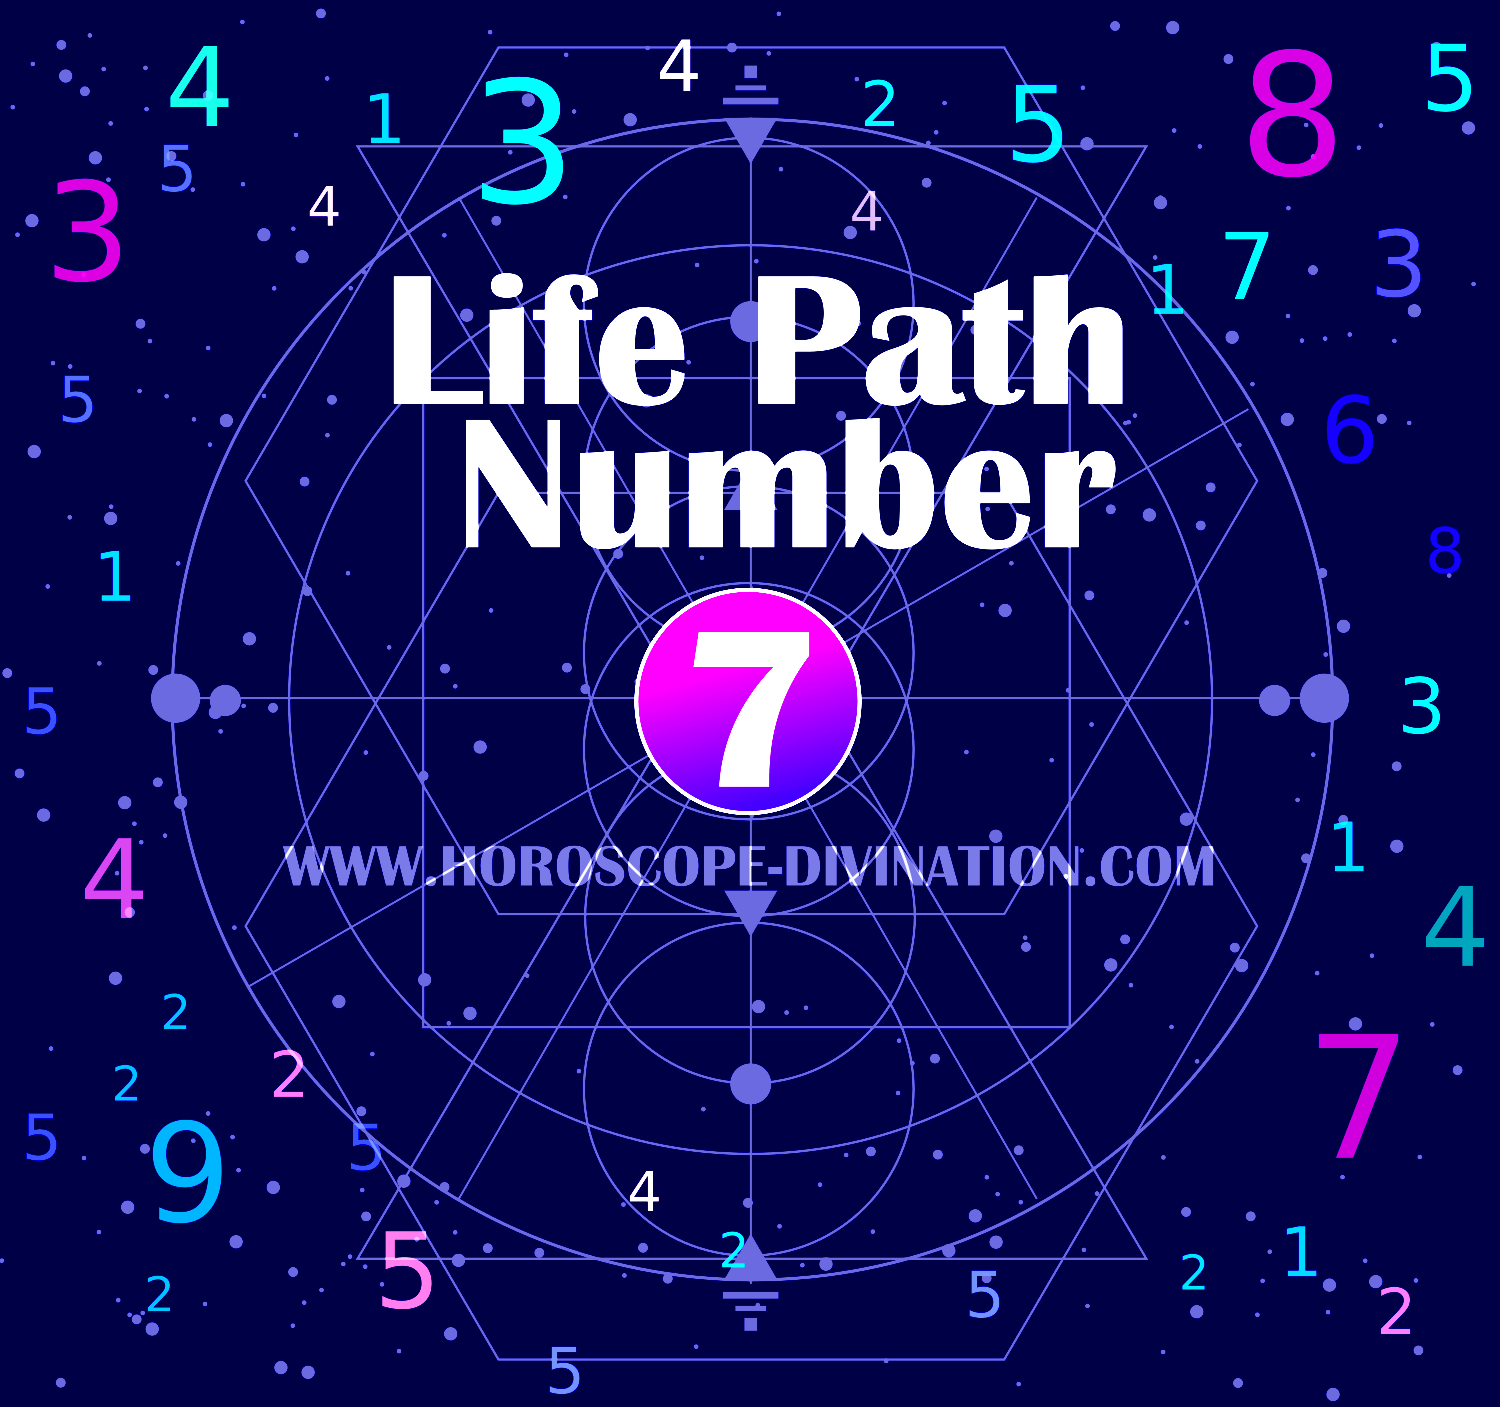 Life Path Number 7 - Numerology